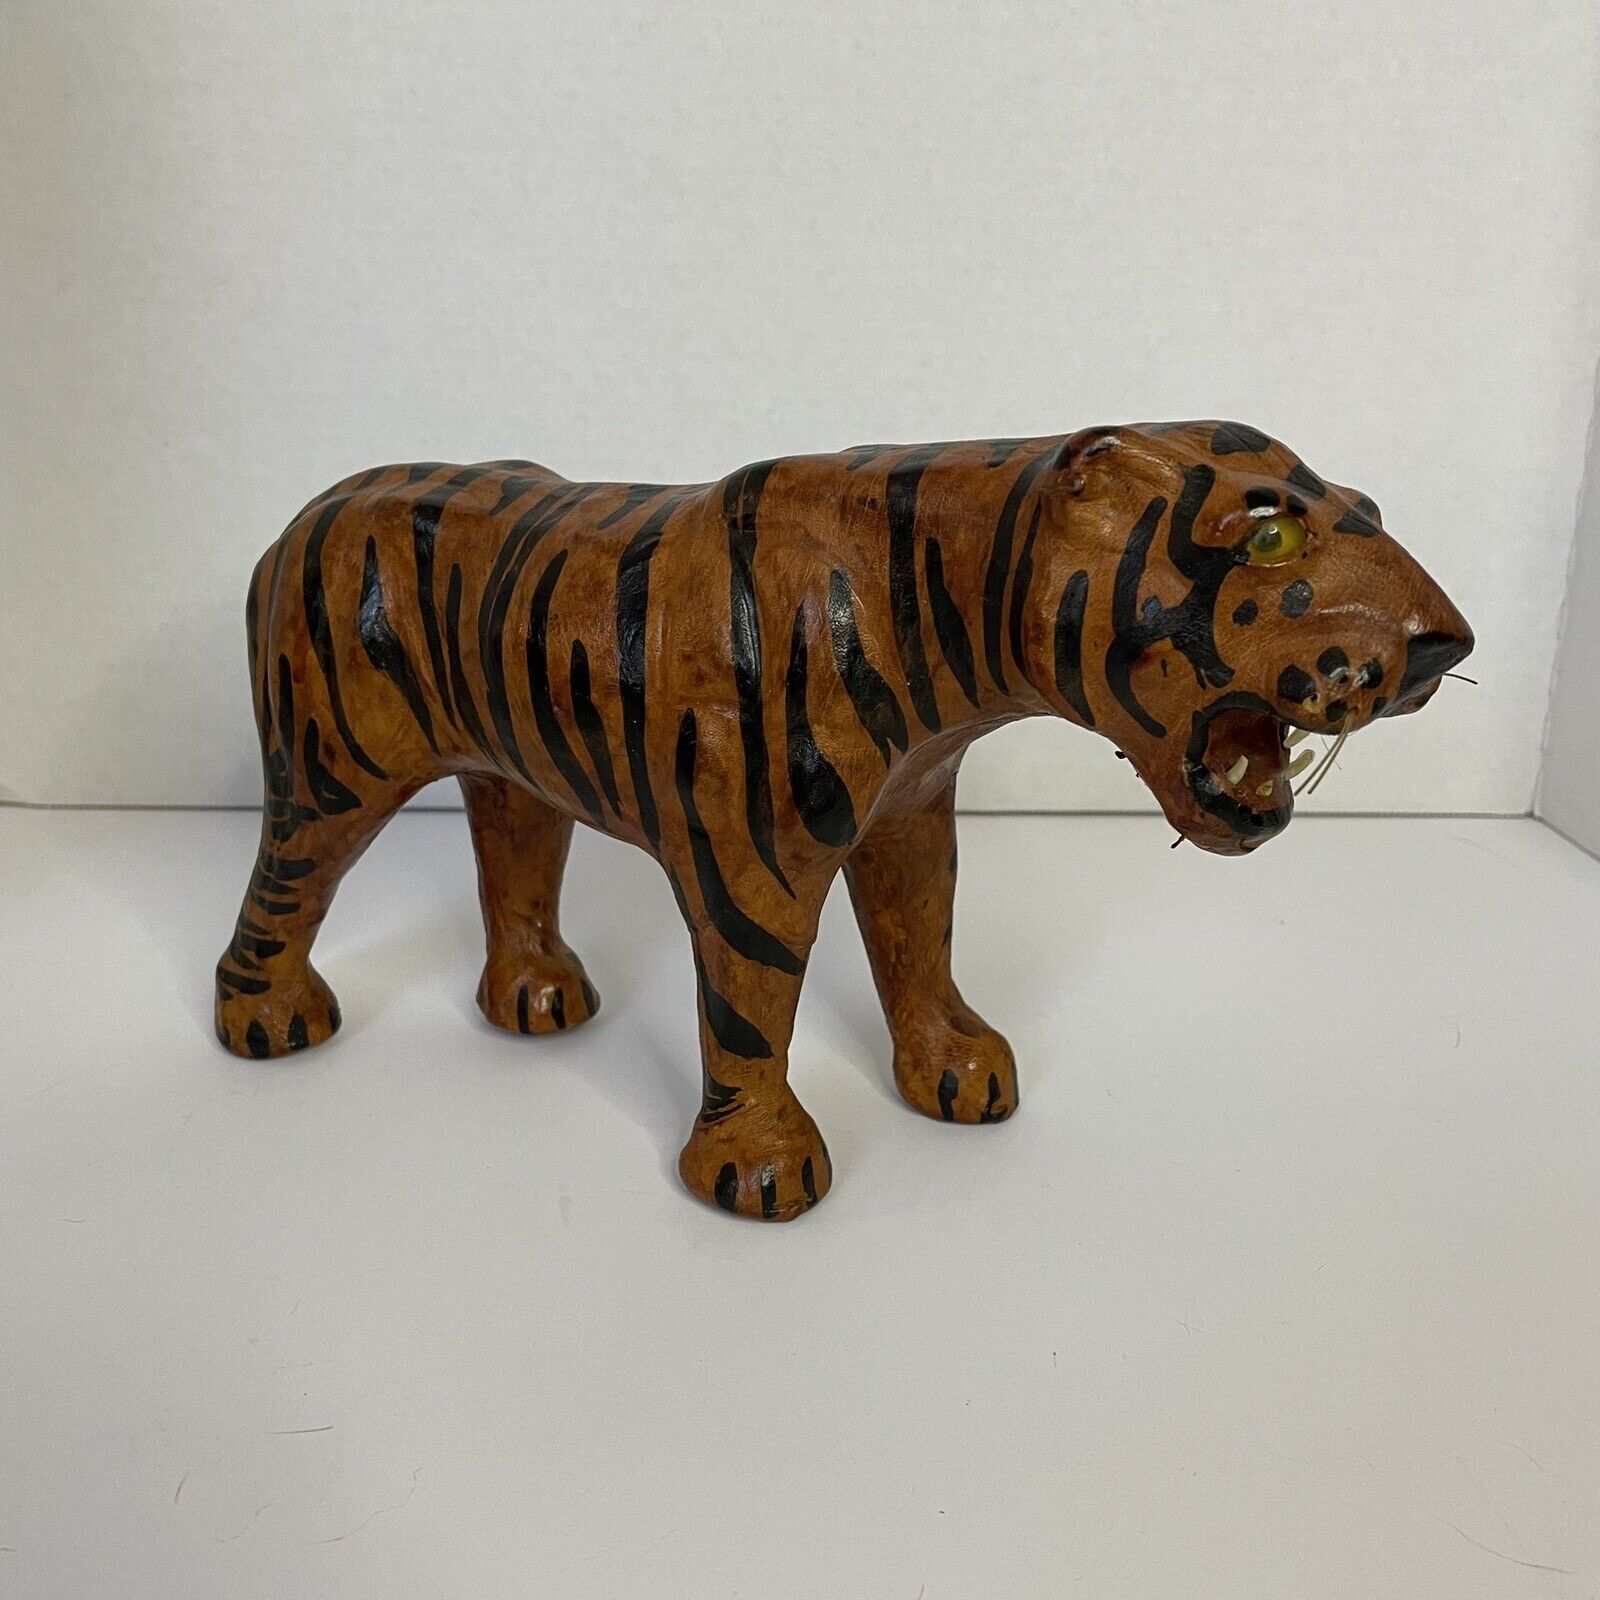 Vintage Genuine Leather Tiger Collectible Decor Glass Eyes, Bearing Teeth 